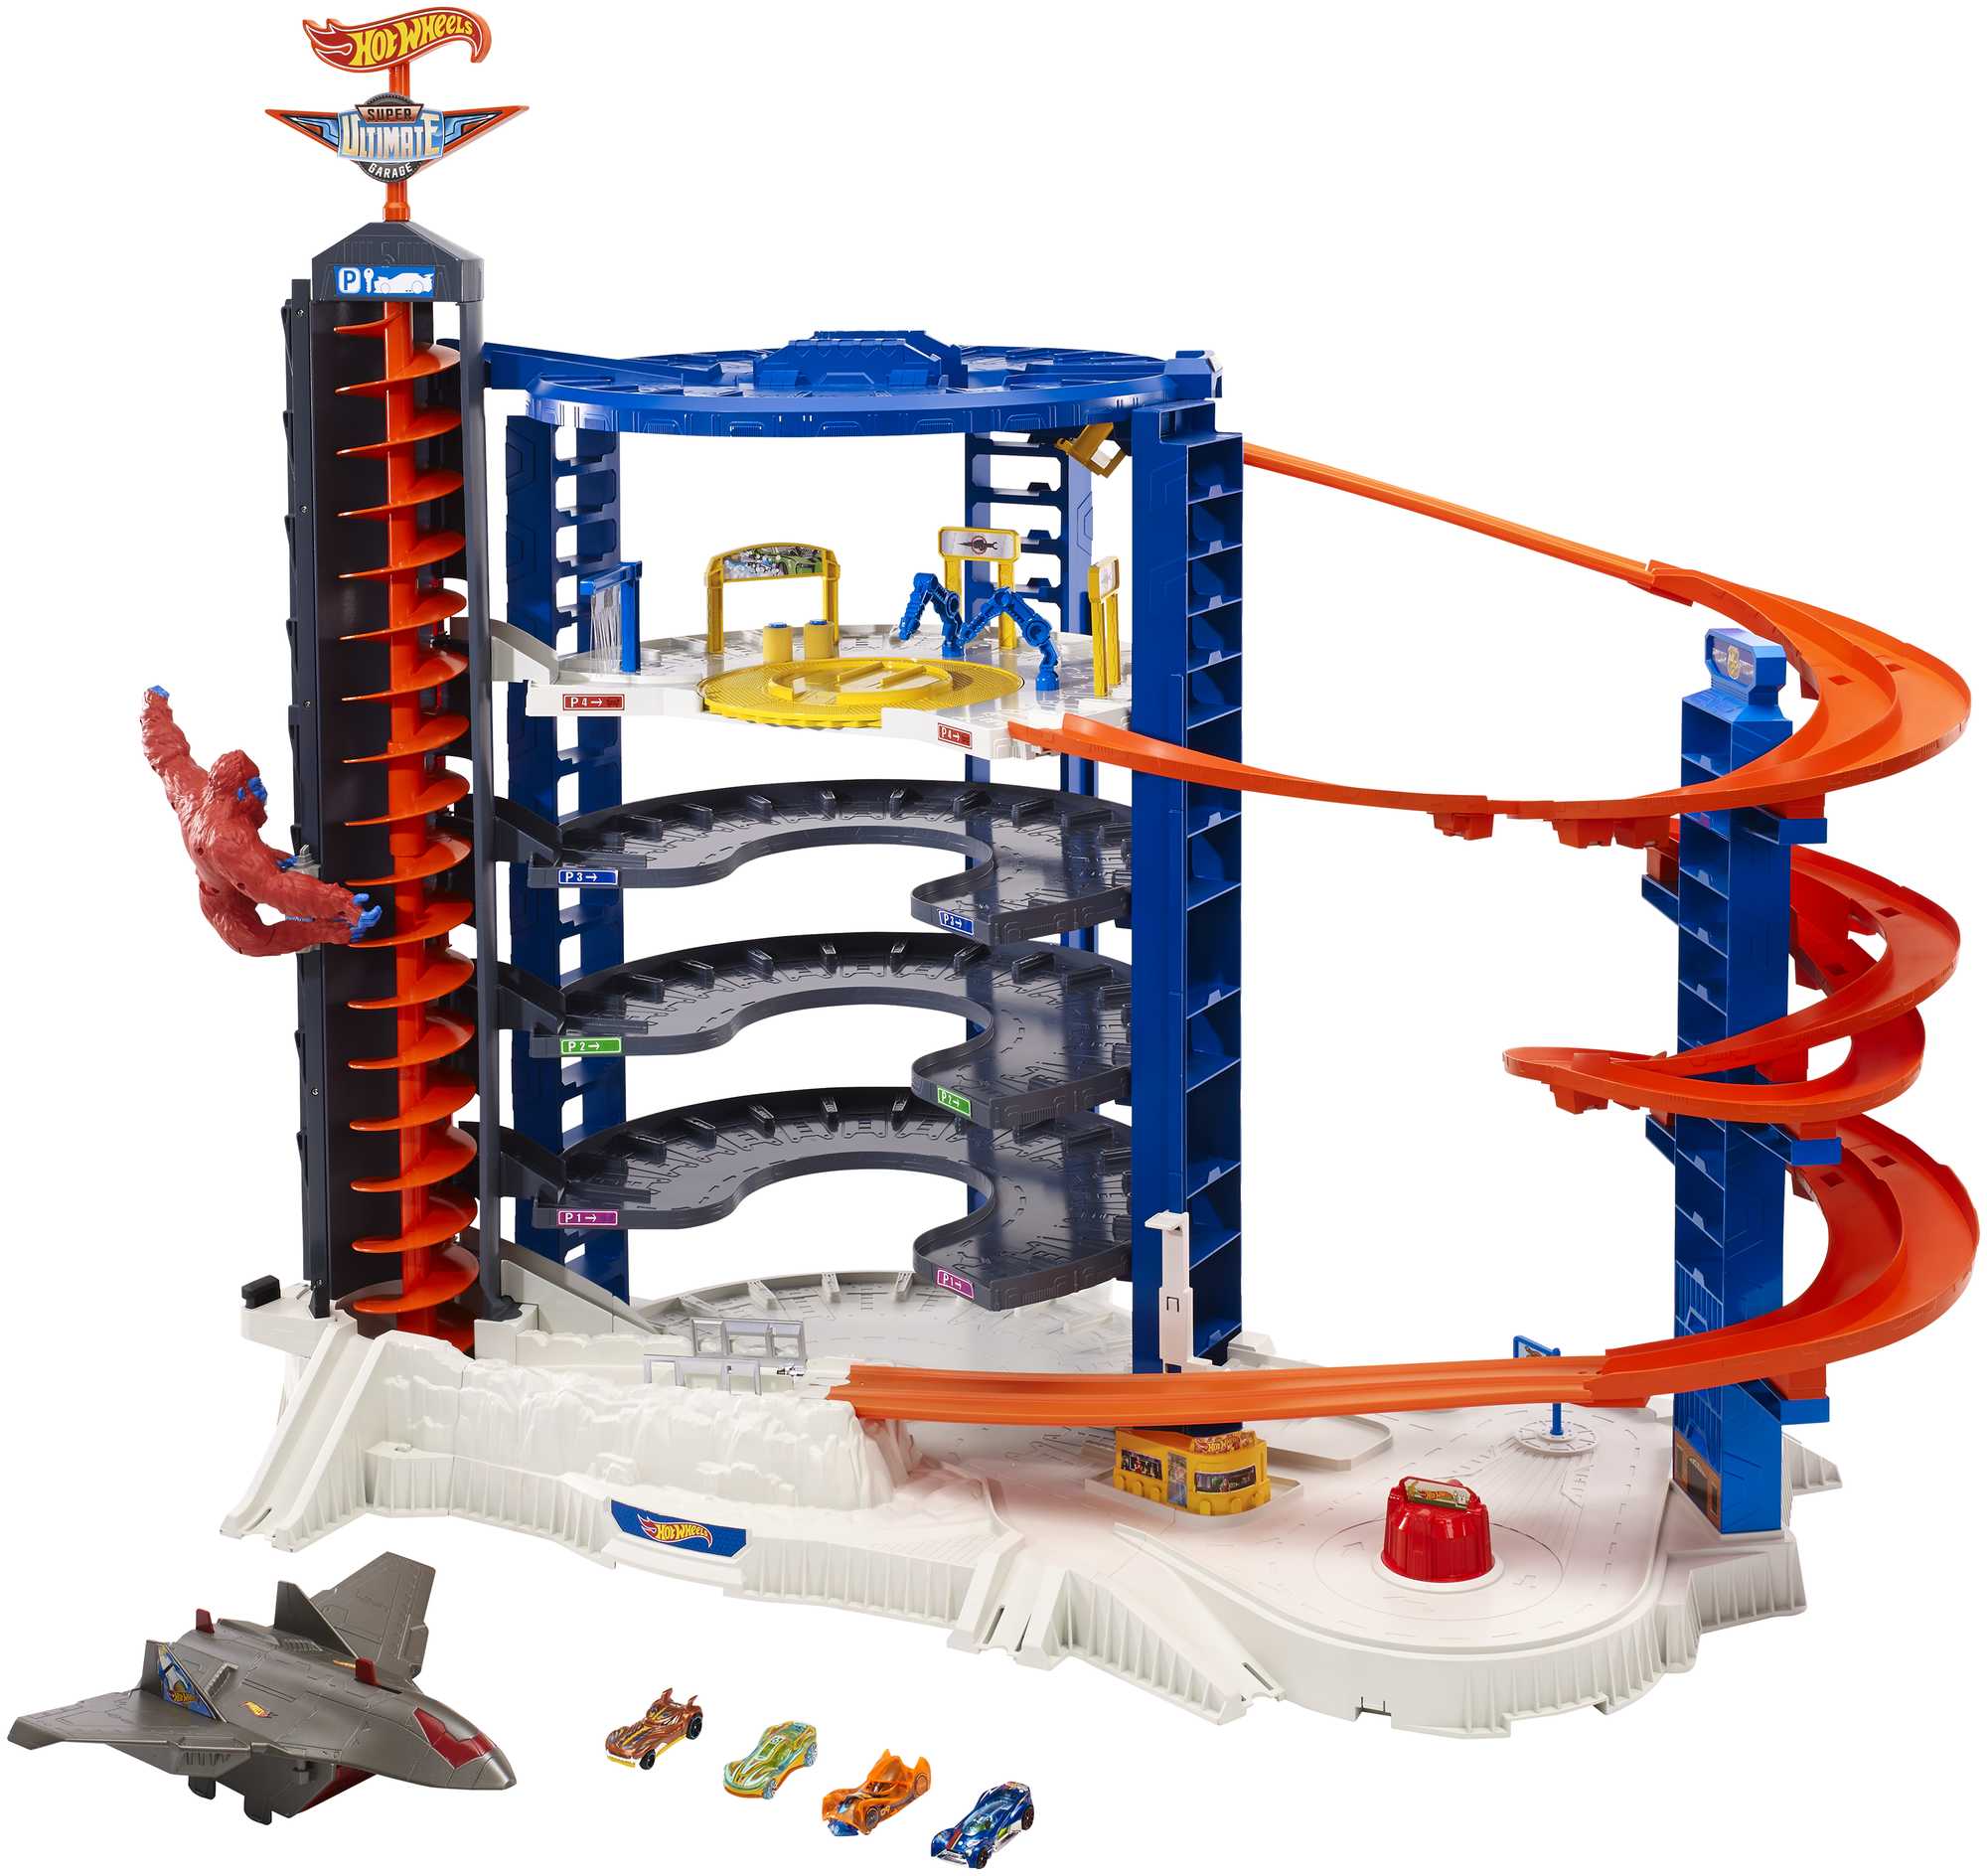 Hot Wheels Track Builder Unlimited Super-8 Kit with a 1:64 scale